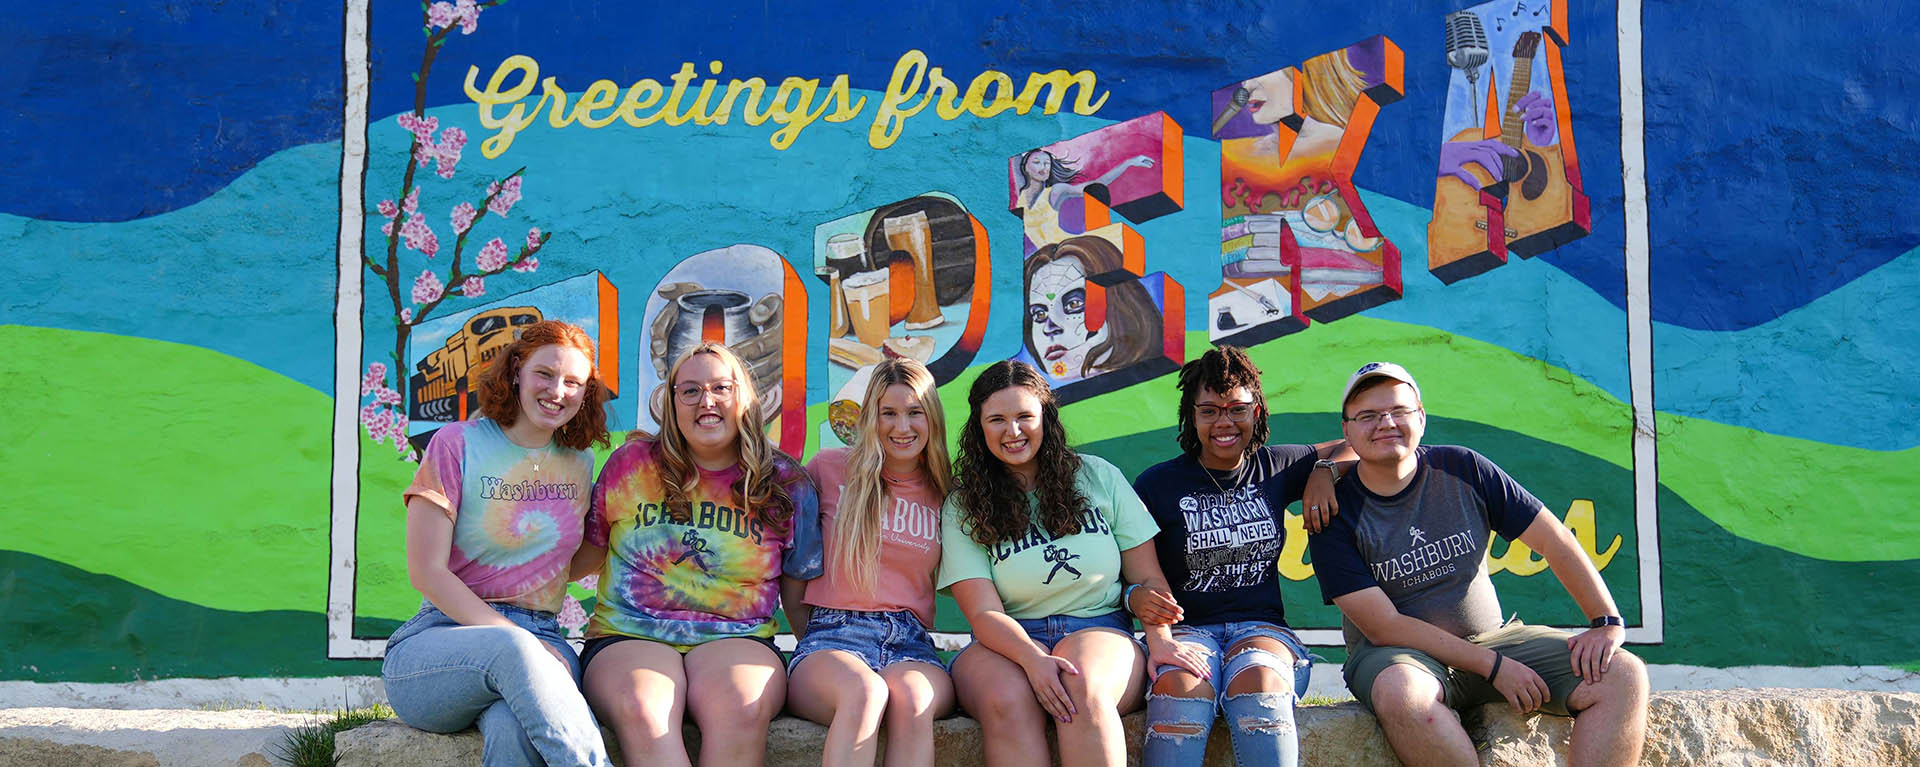 Washburn students smile for a photo in front of a "Greetings from Topeka" mural